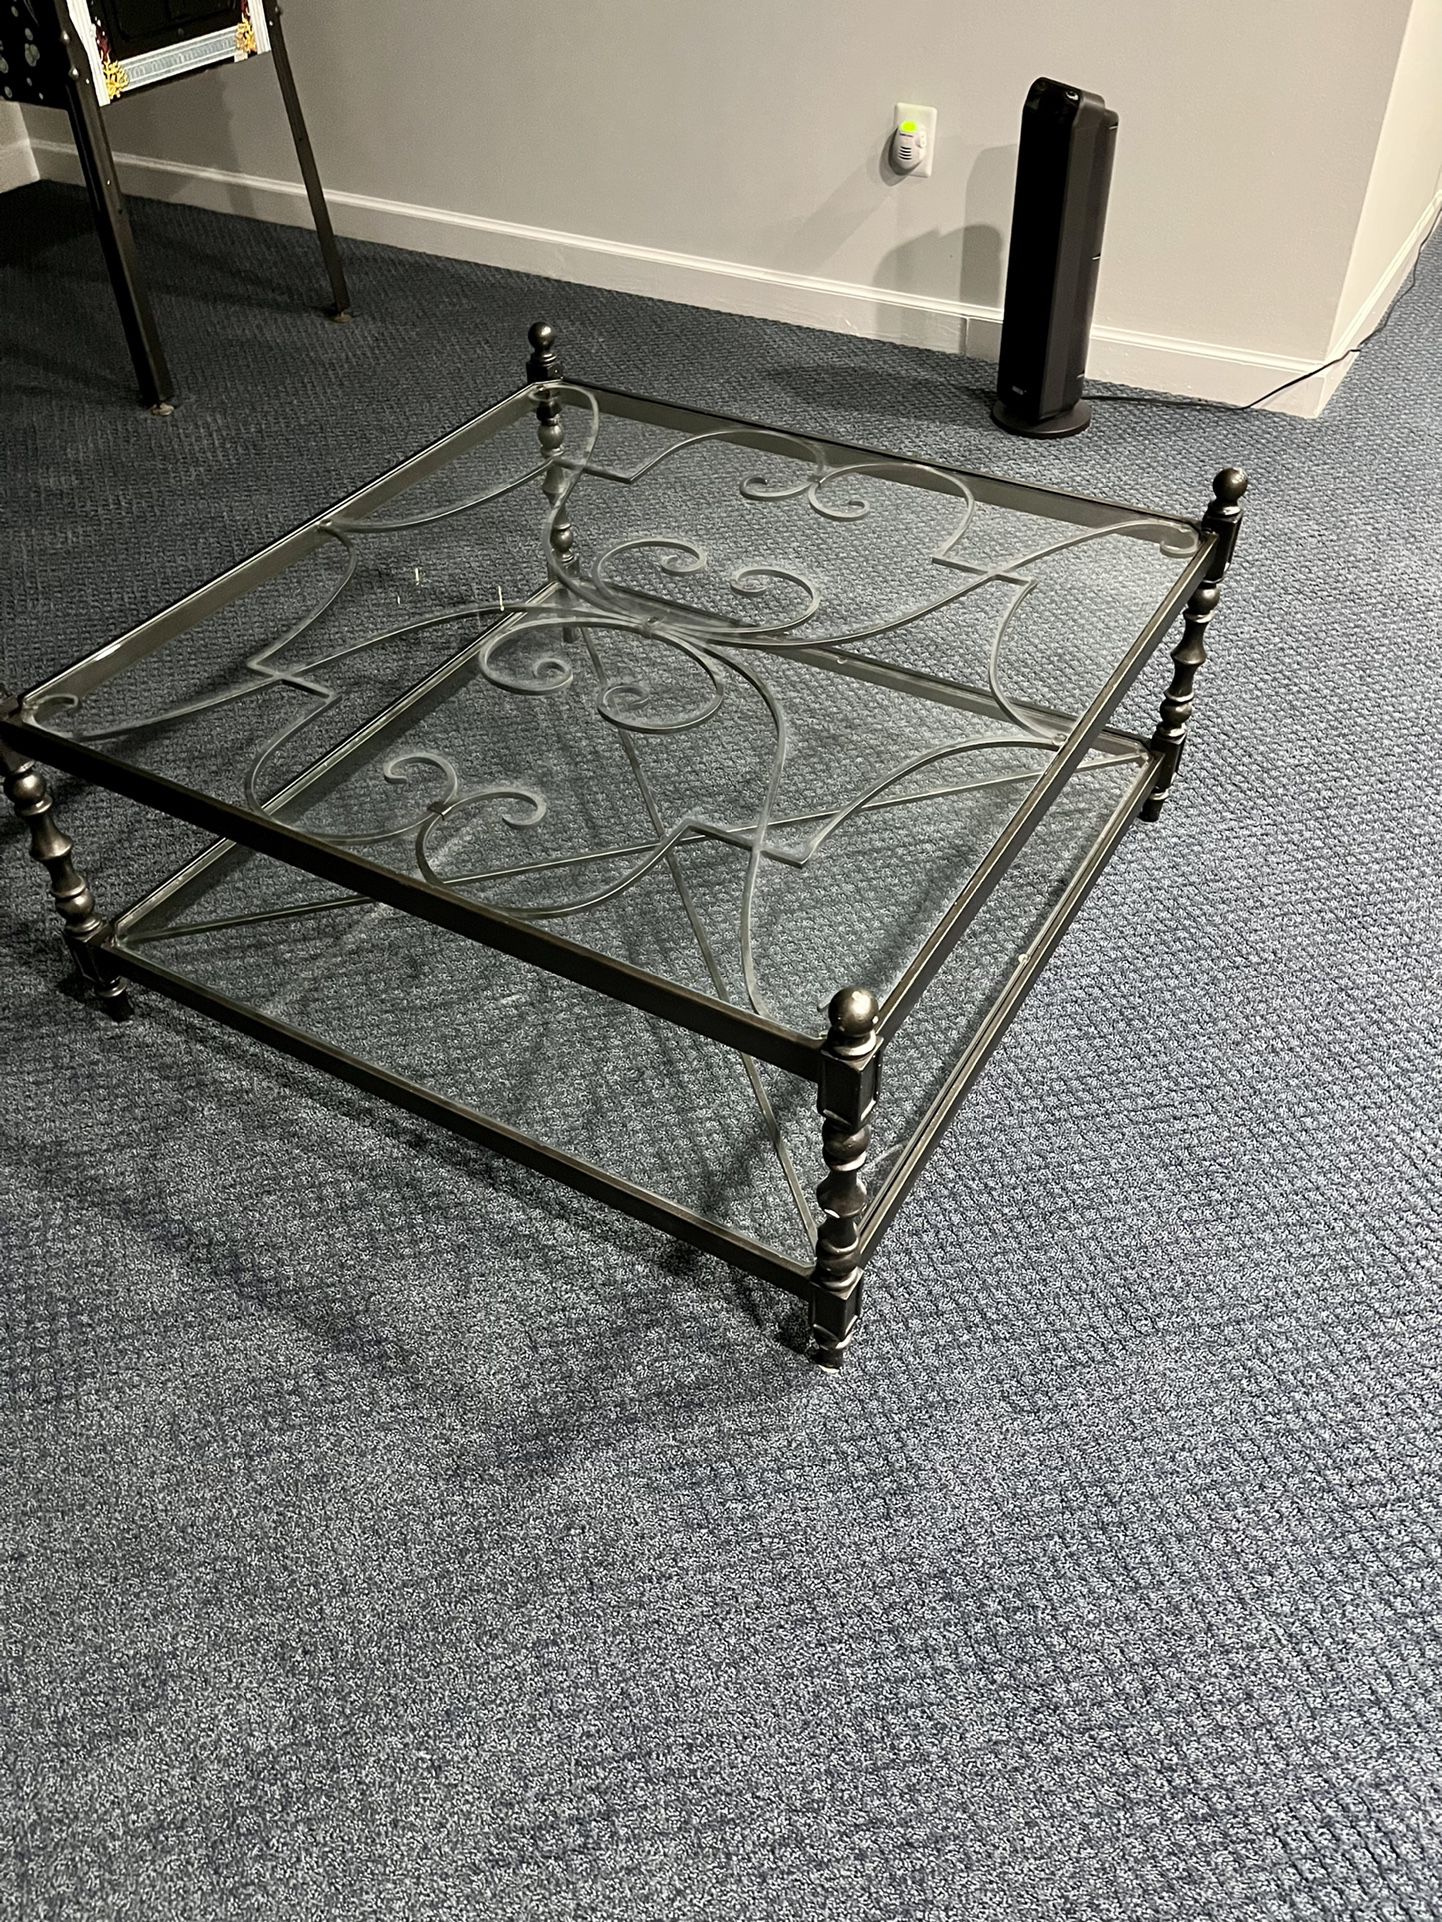 Wrought Iron Coffee Table 